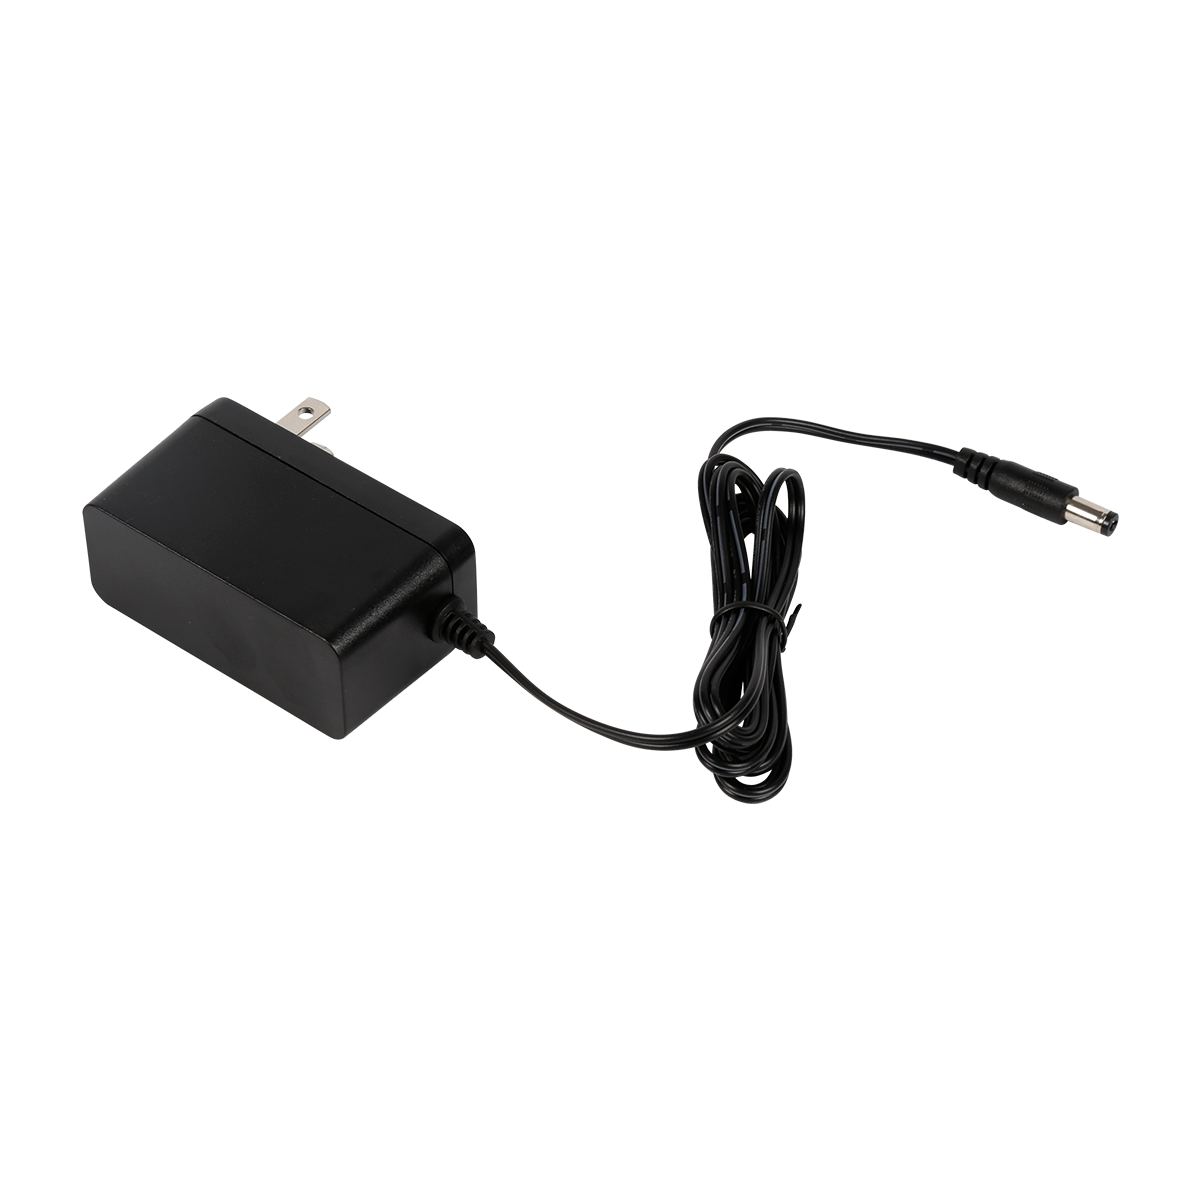 What is the power adapter(图1)